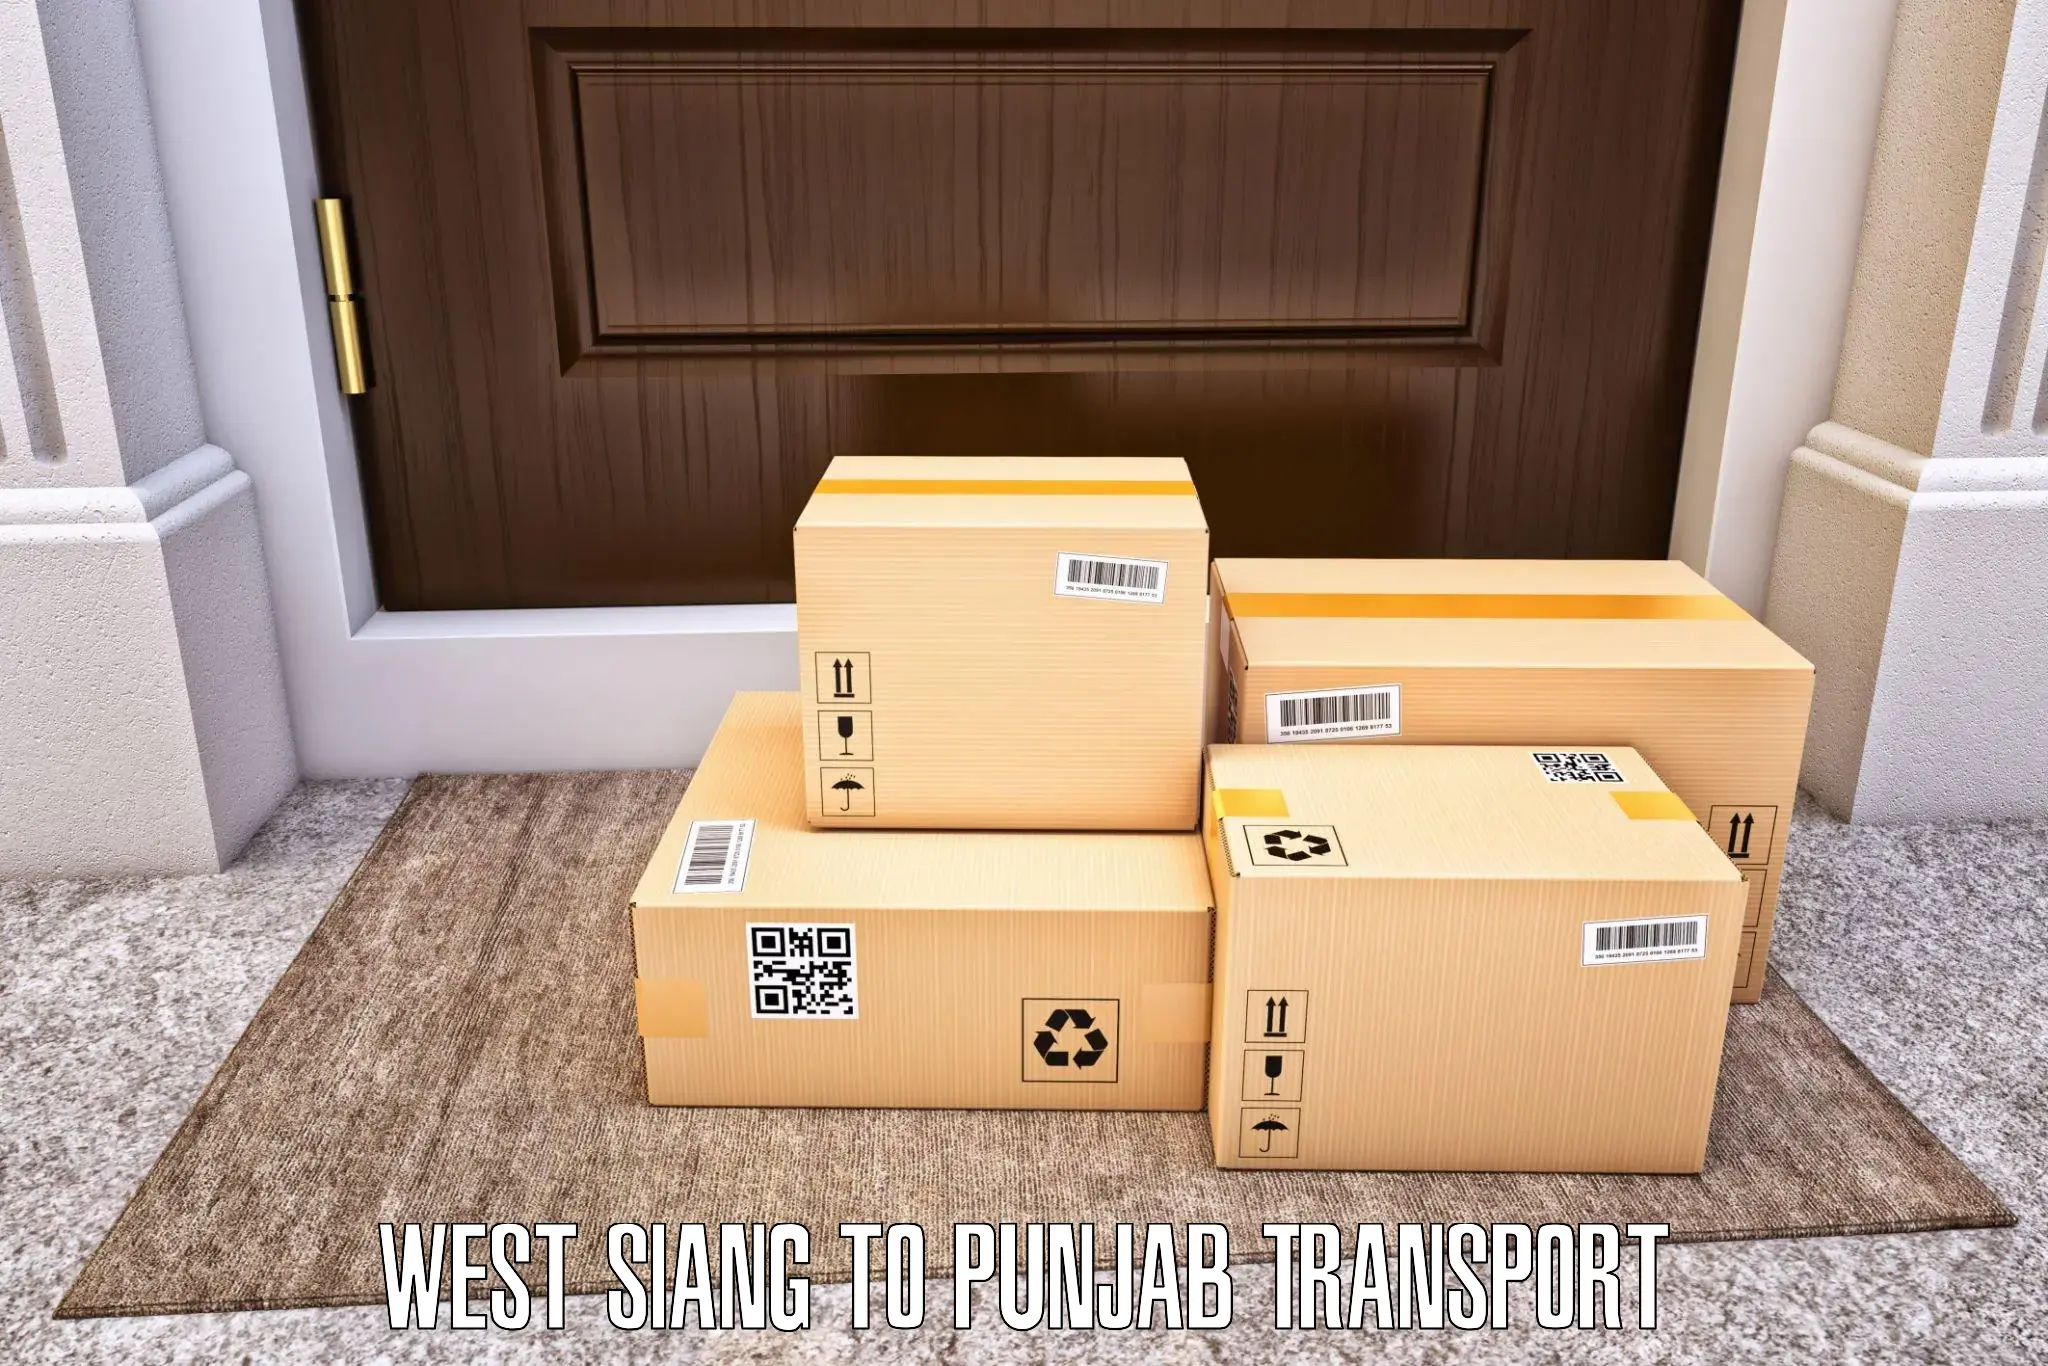 Online transport service in West Siang to Punjab